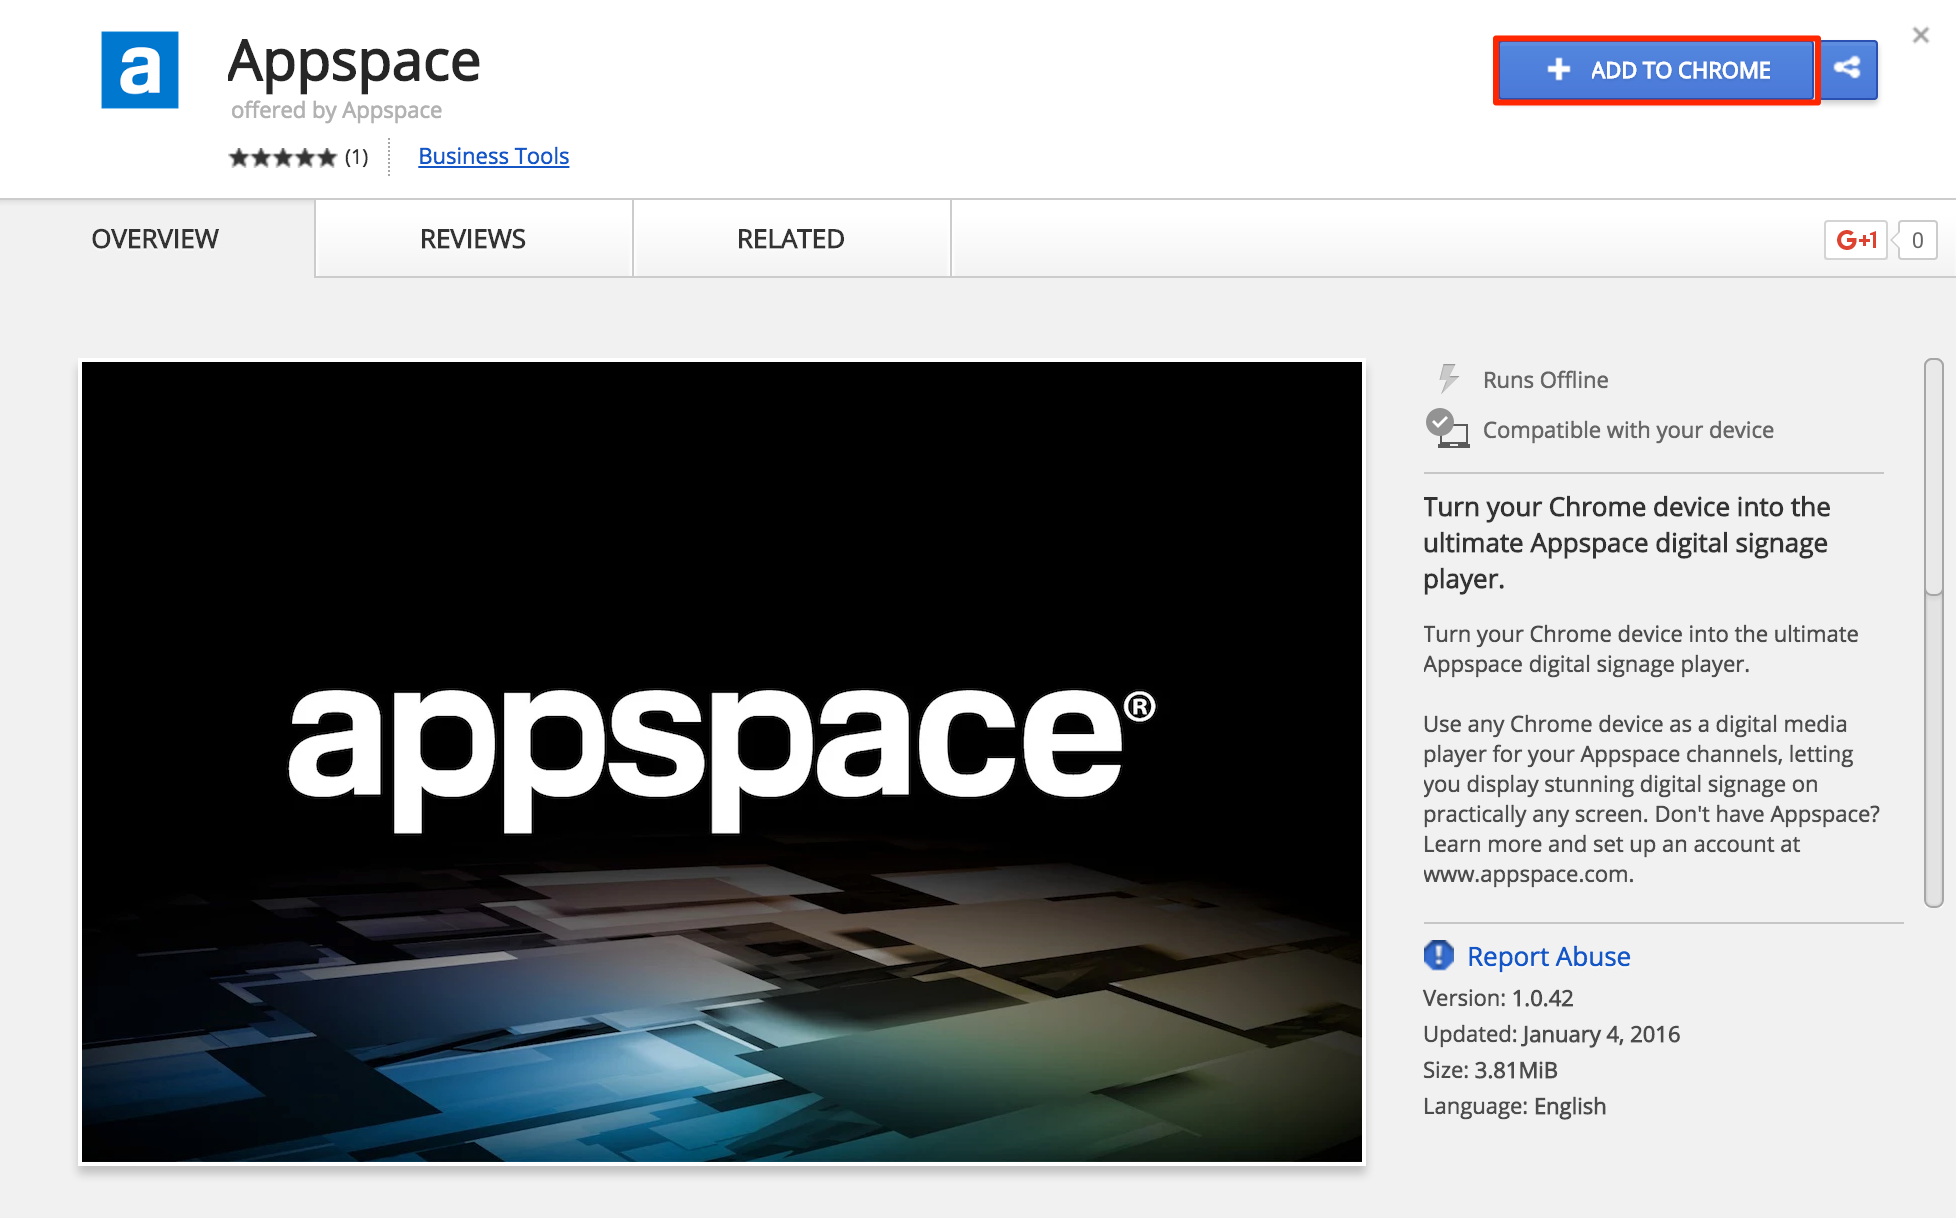 Installing the Appspace App on a Chrome OS device — Appspace v6.1 Documentation1956 x 1218